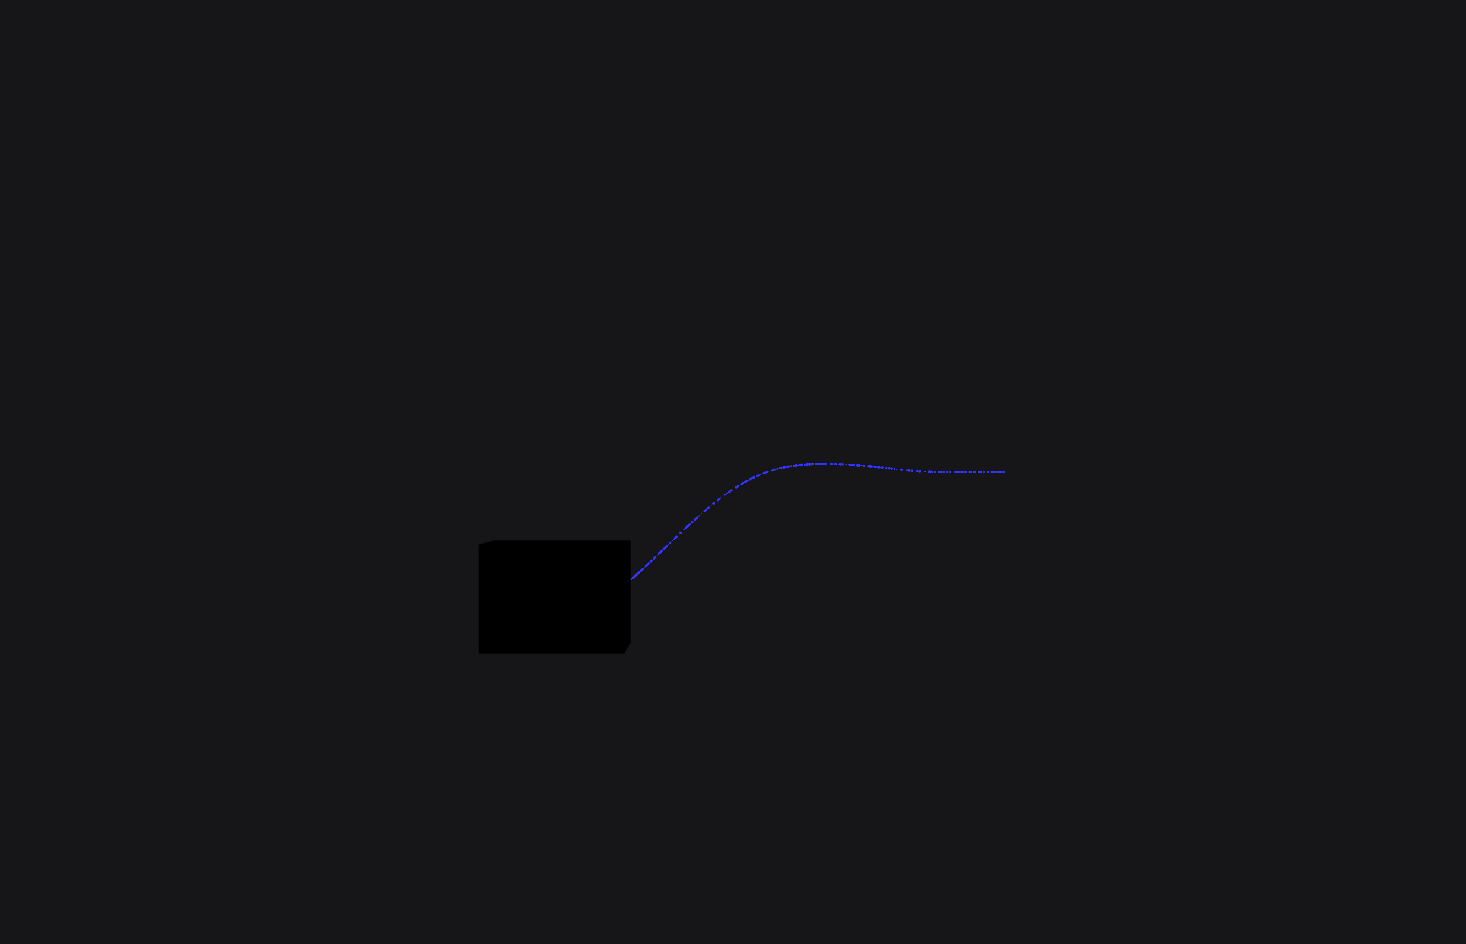 example of points on curve without a constant offset